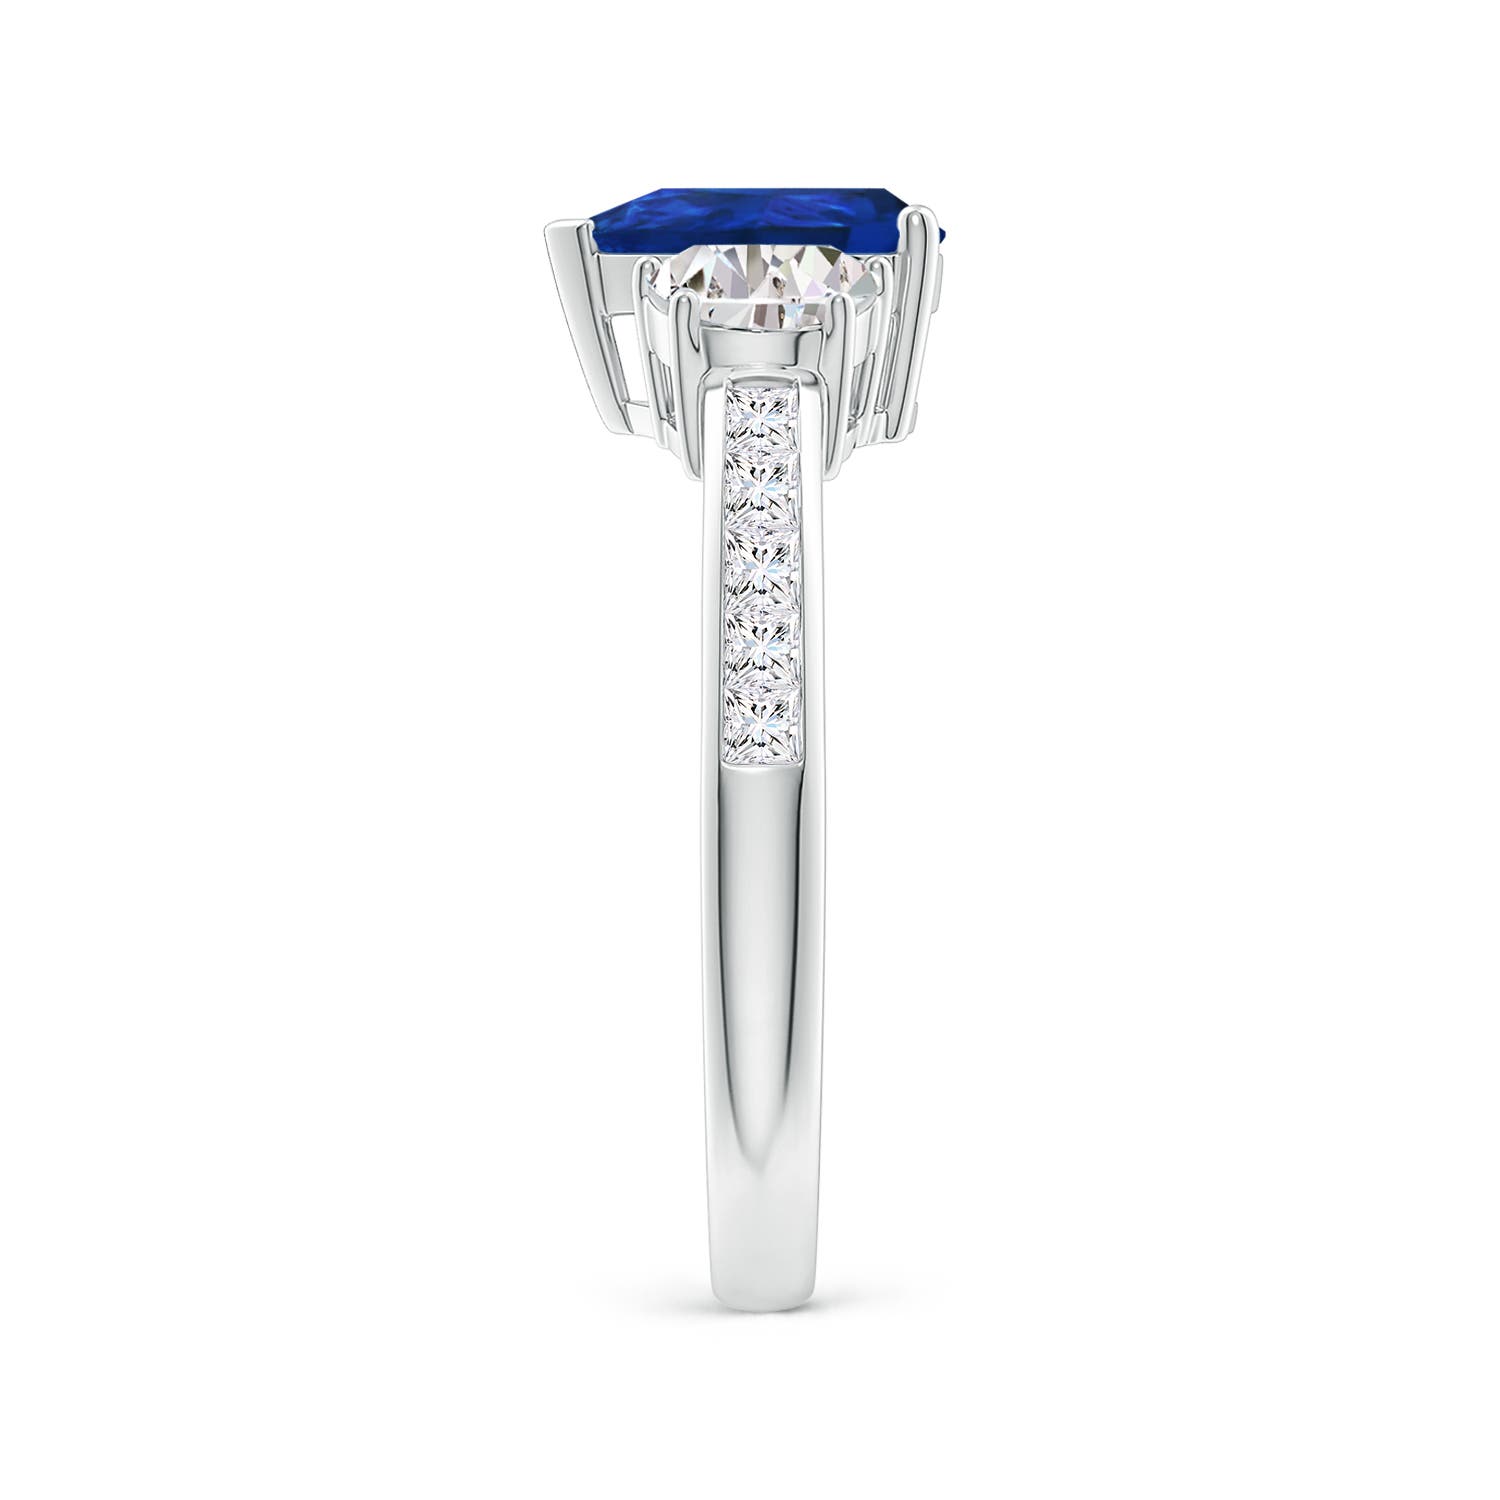 AAA - Blue Sapphire / 2.01 CT / 14 KT White Gold